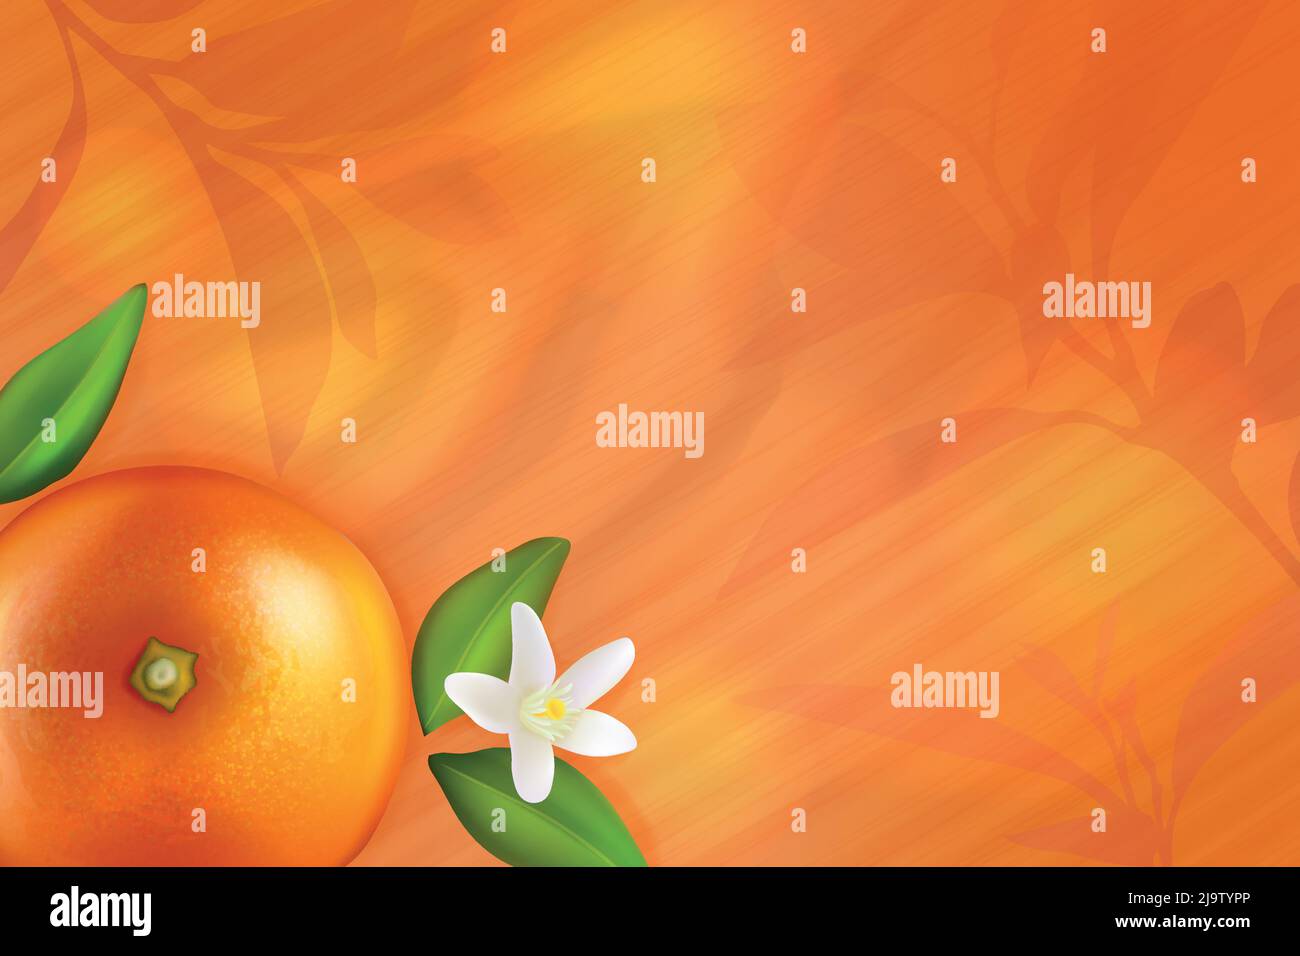 Fresh 3d orange top view vector illustration. Abstract silhouettes of orange tree branches, shadow light effect on surface and juicy citrus fruit with leaves and flower in corner of background Stock Vector